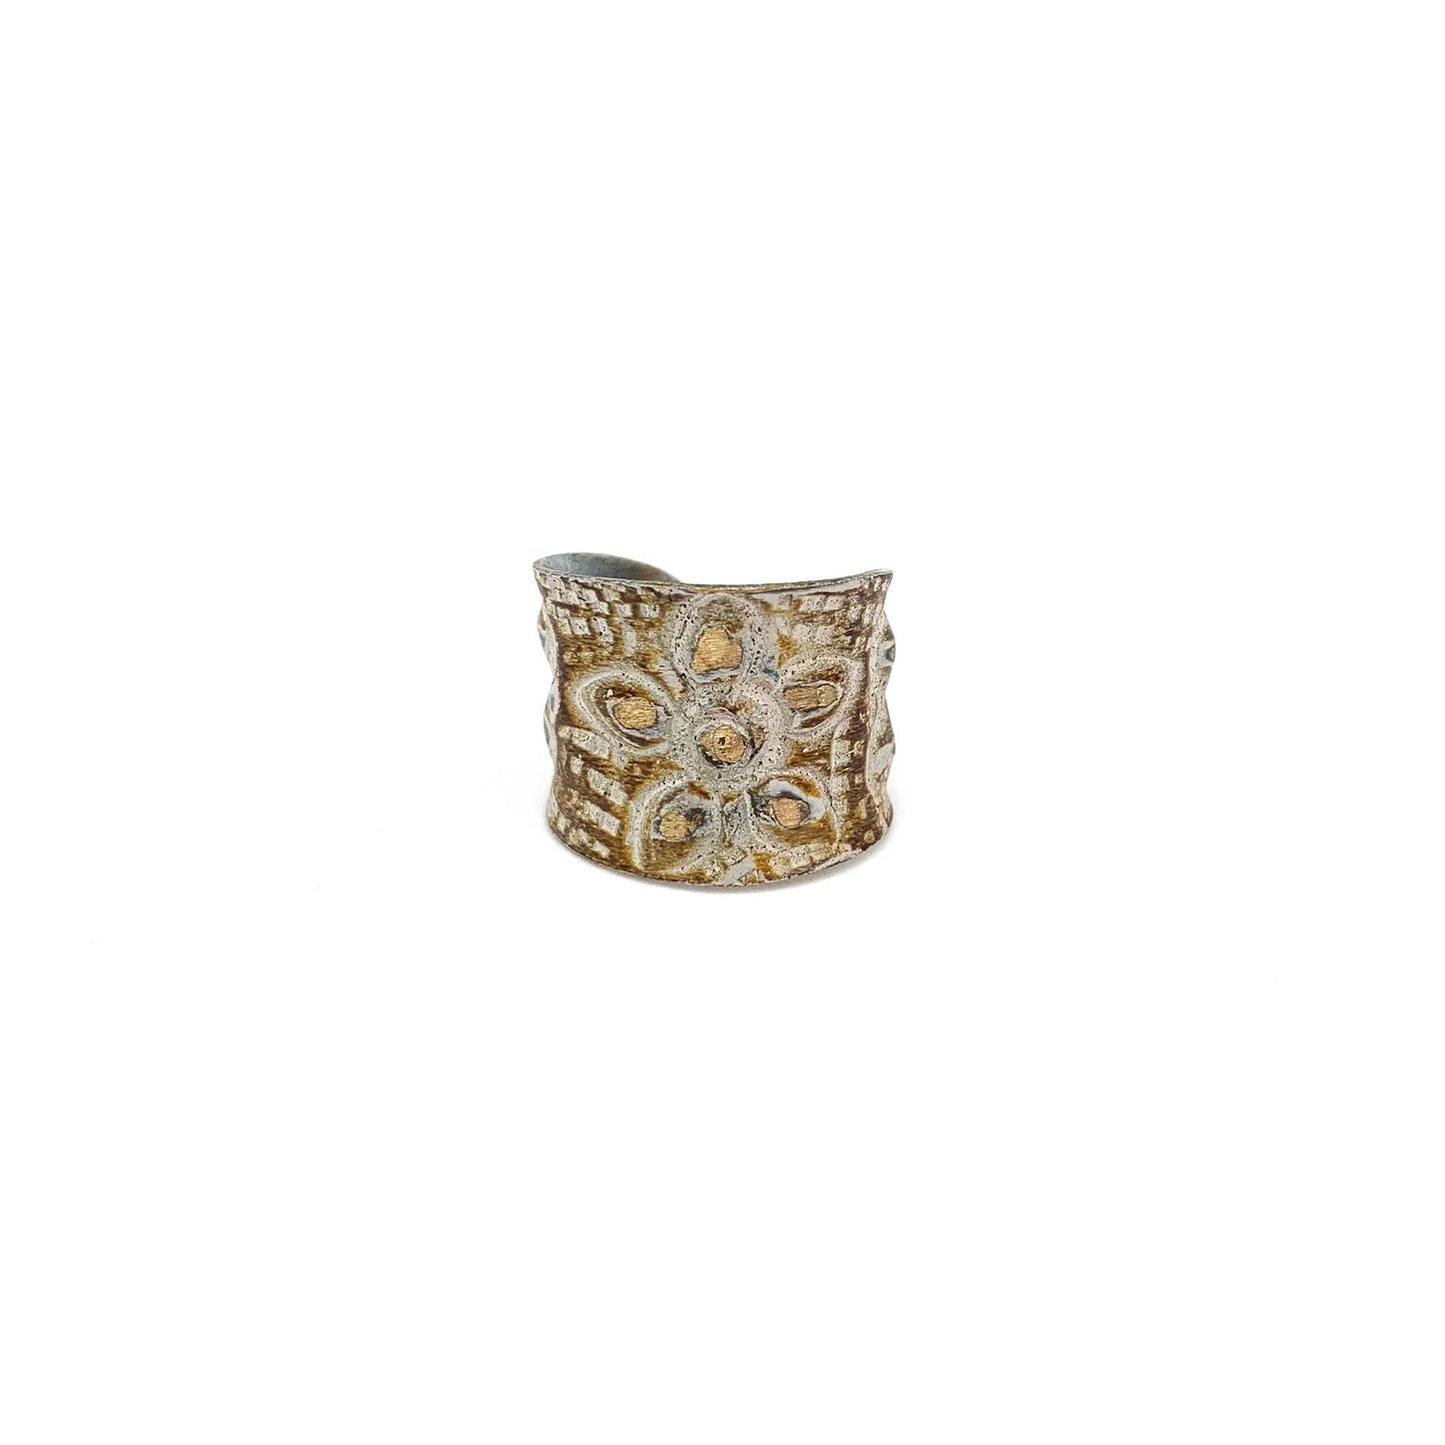 Brass Patina Ring - Warm Brown and White Large Flower